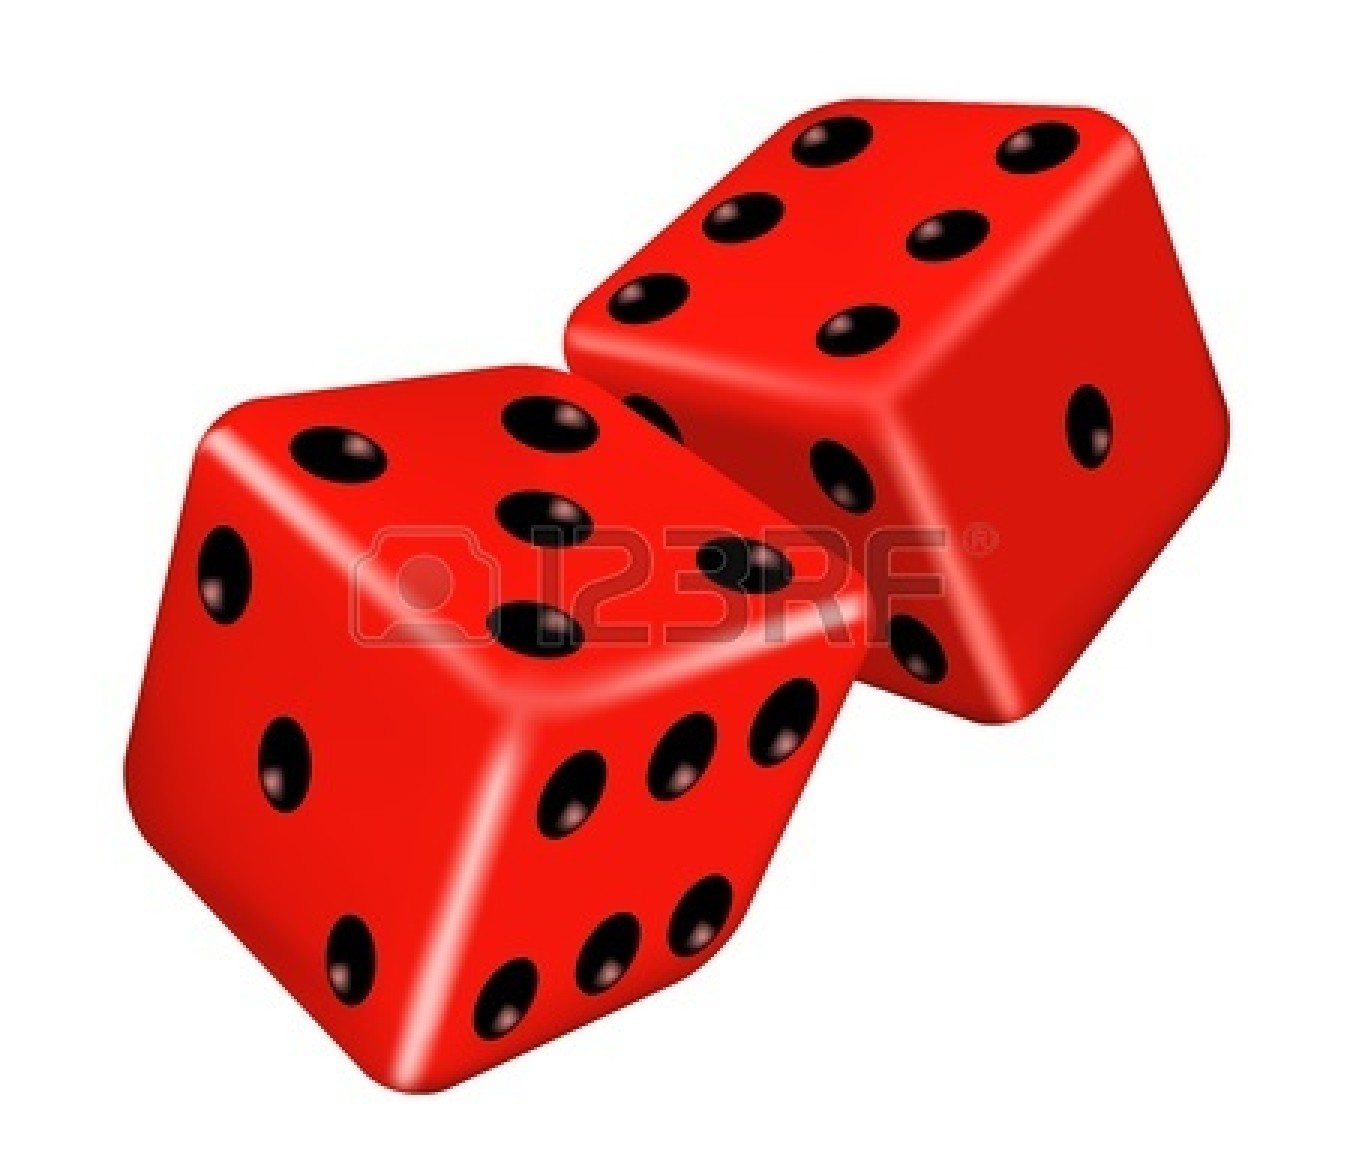 Red Dice Clipart   Clipart Panda   Free Clipart Images